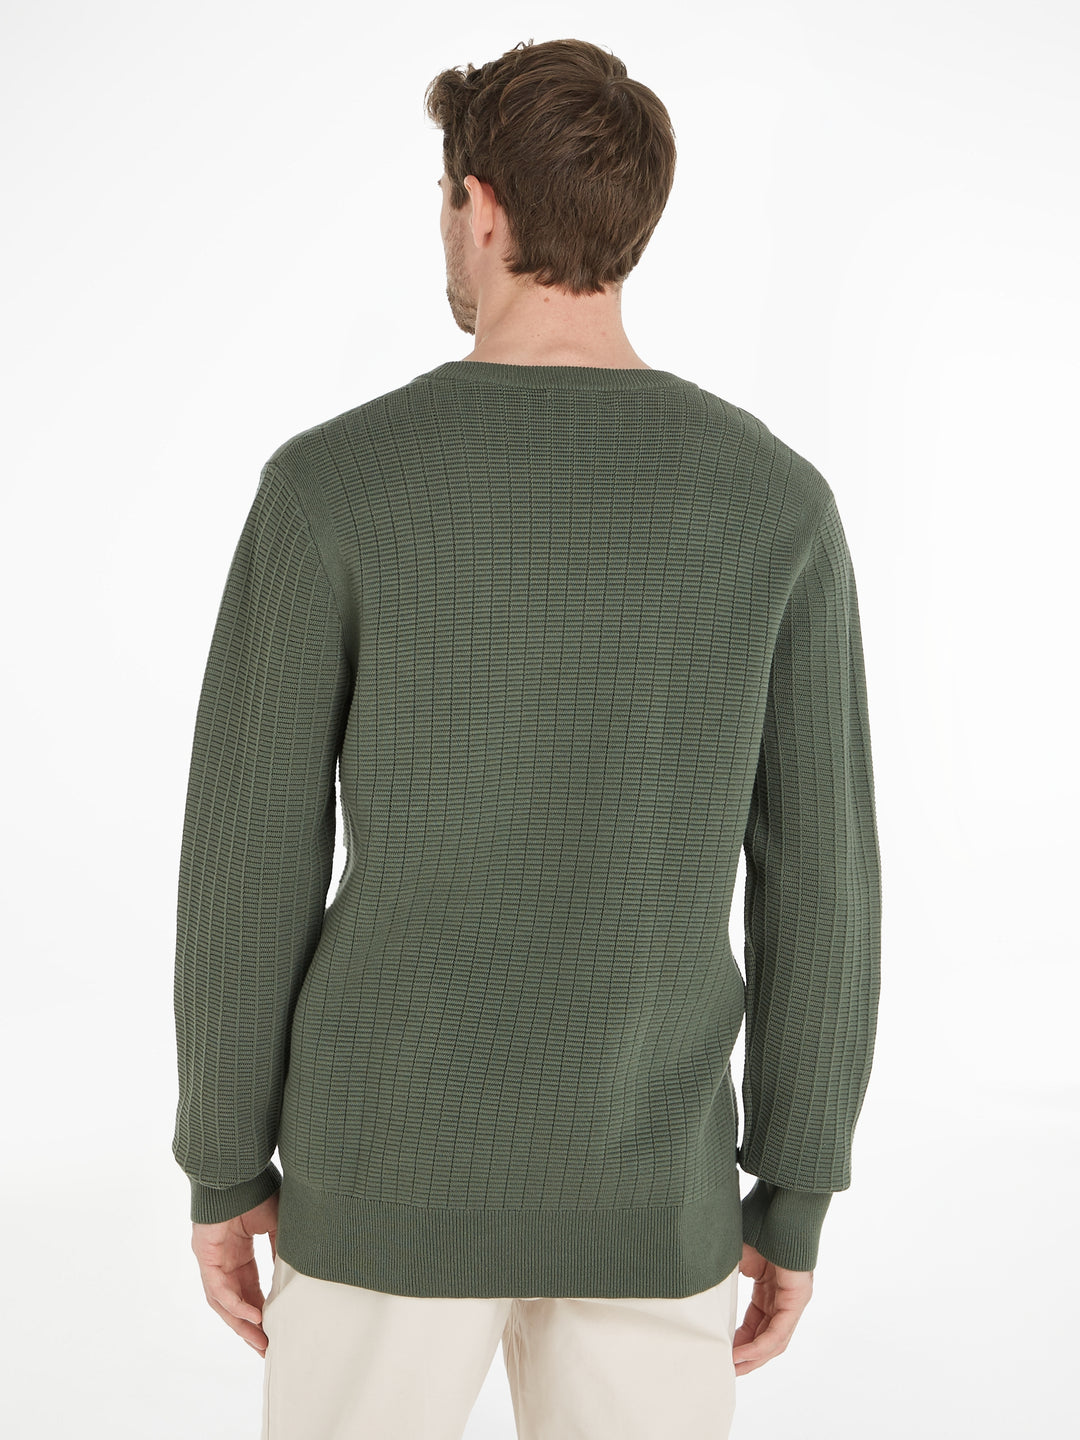 CK STRUCTURE SWEATER - THYME